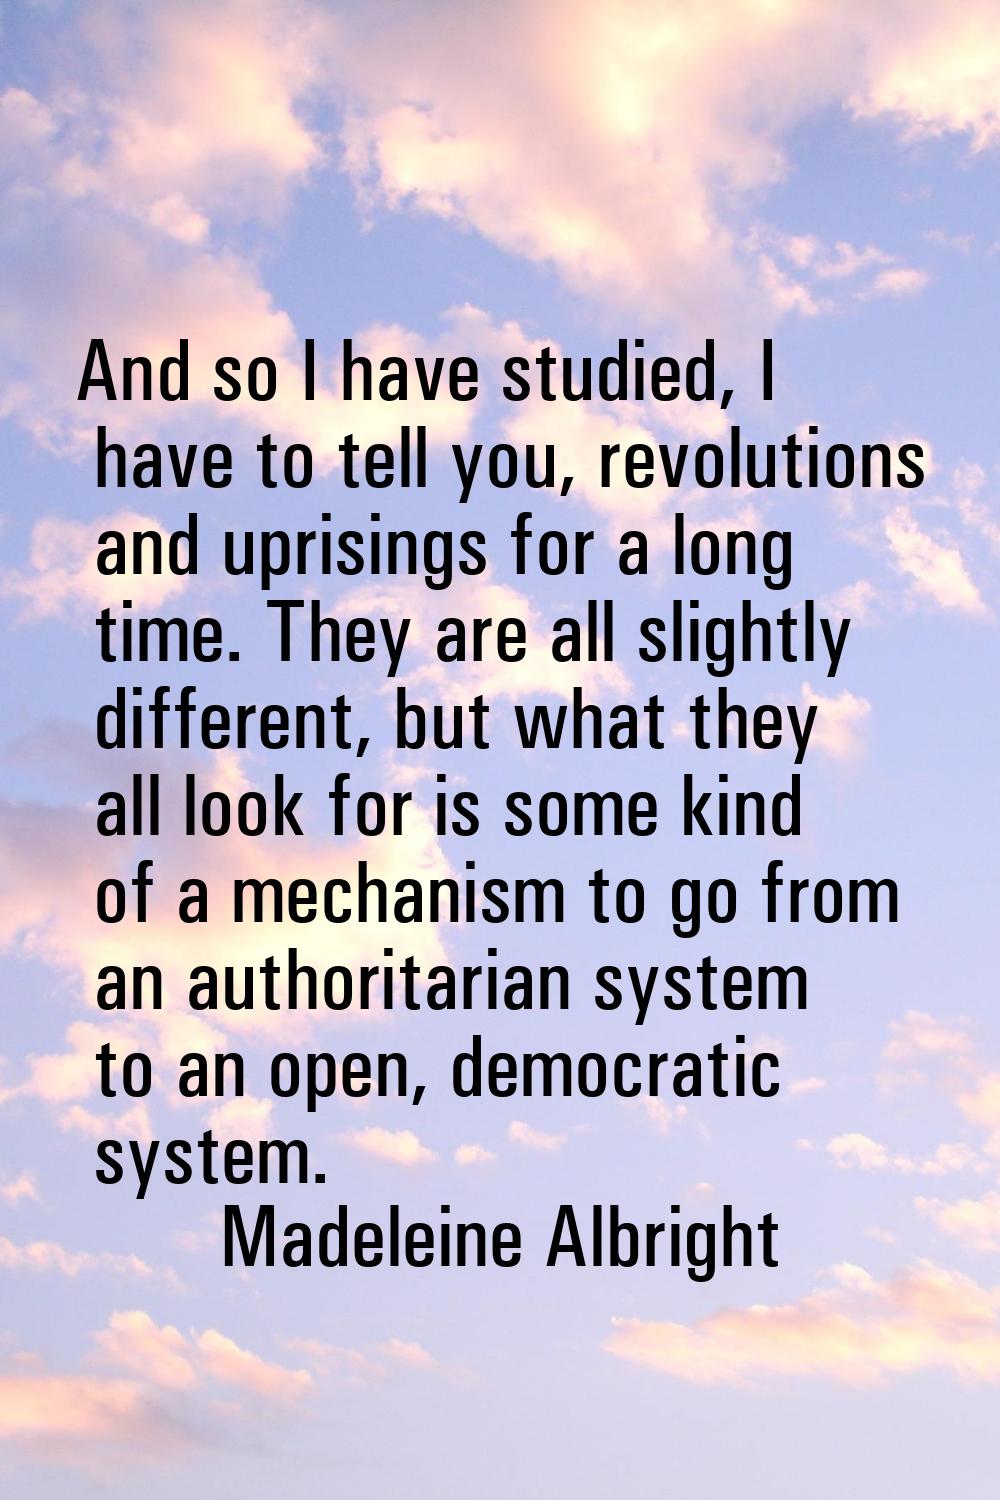 And so I have studied, I have to tell you, revolutions and uprisings for a long time. They are all 